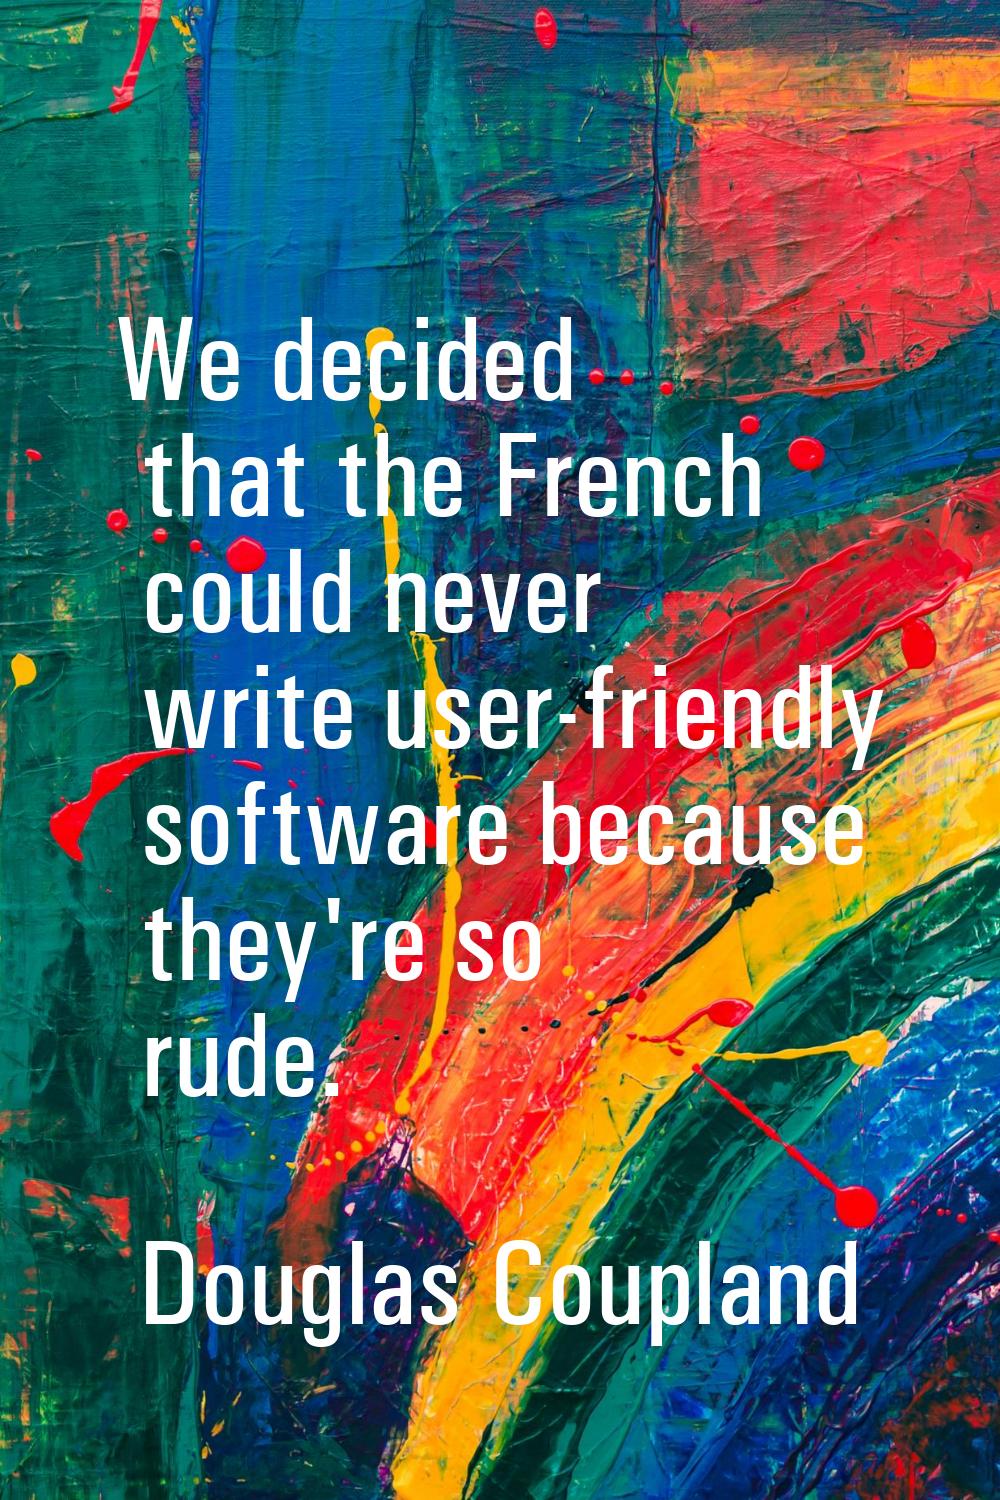 We decided that the French could never write user-friendly software because they're so rude.